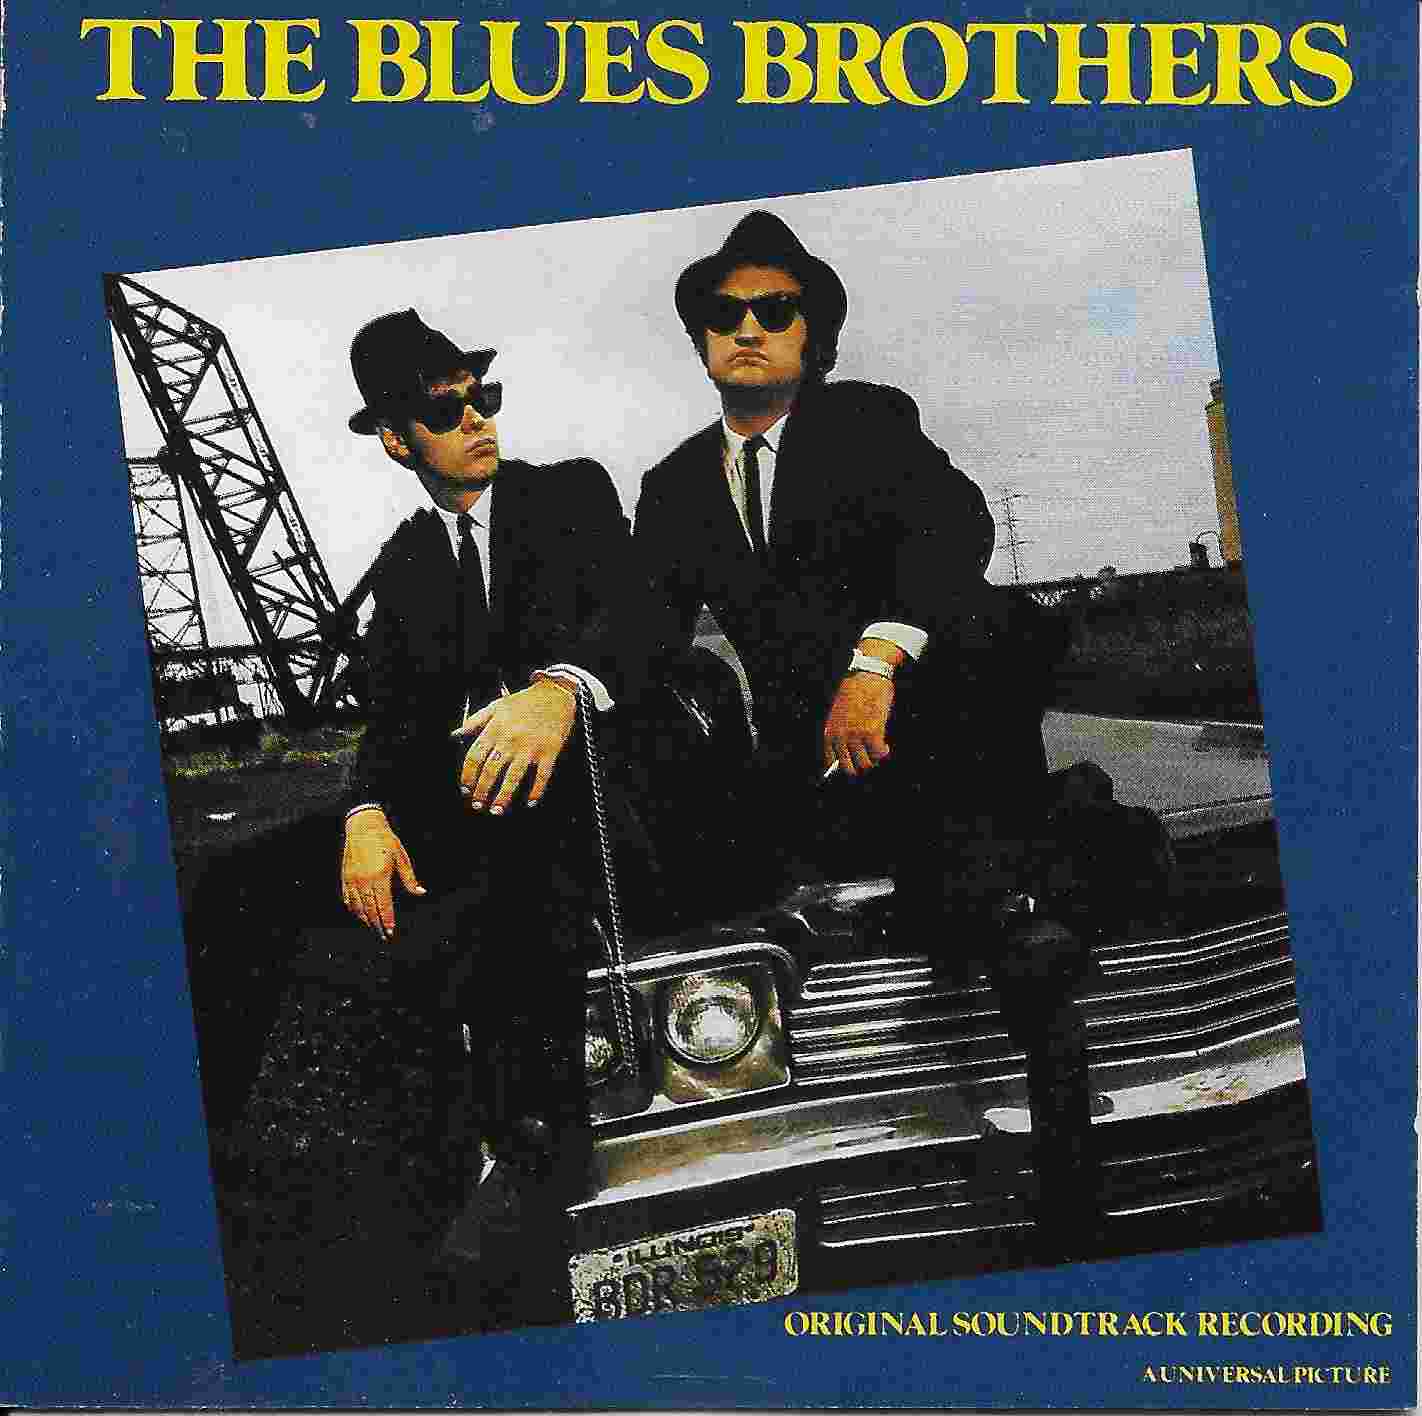 Picture of 81471 - 2 The blues brothers by artist Various from ITV, Channel 4 and Channel 5 cds library